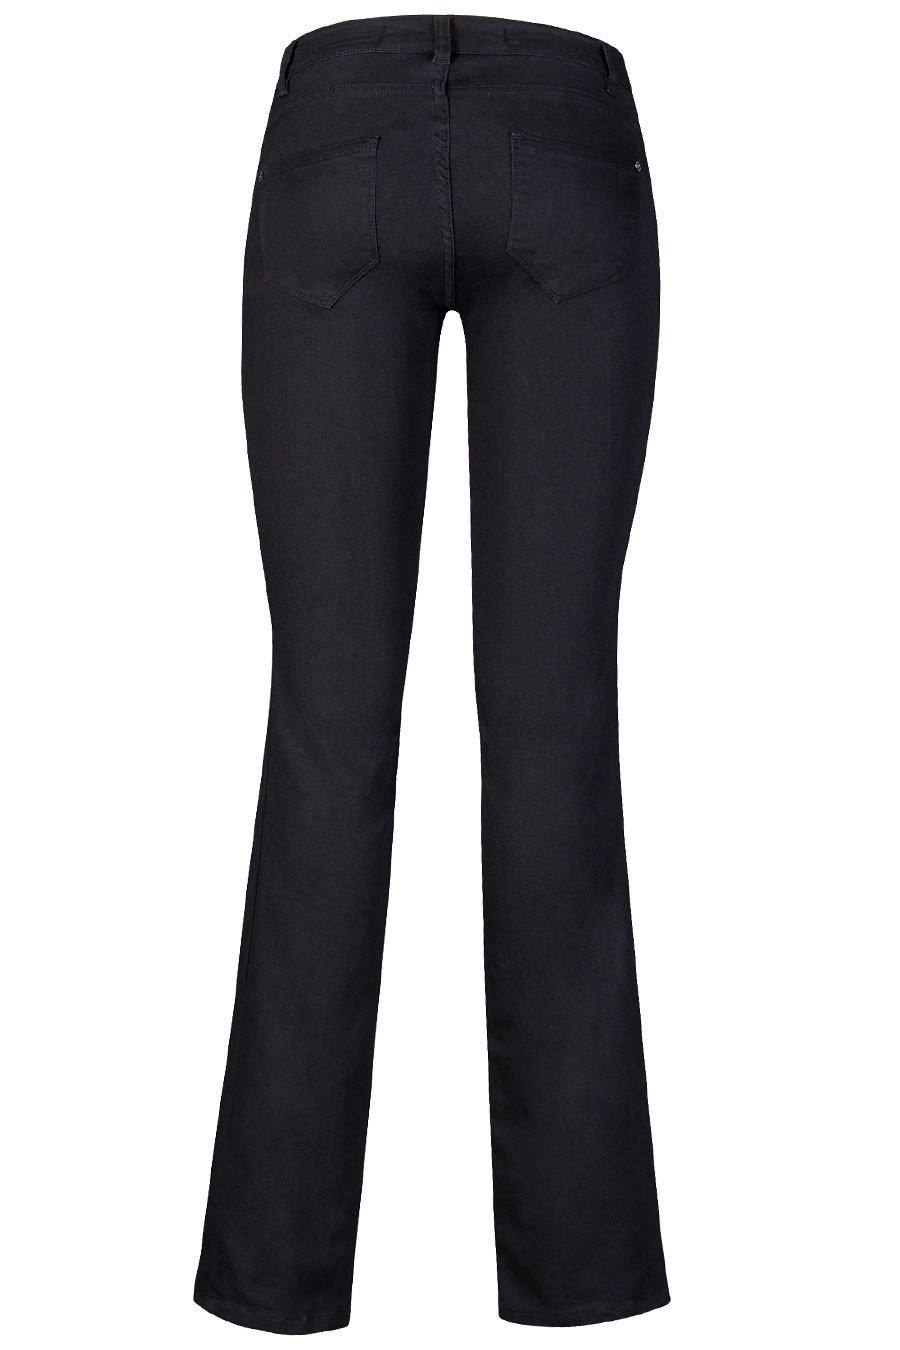 ESPRIT - Stretch jeggings with an under-bump waistband at our online shop